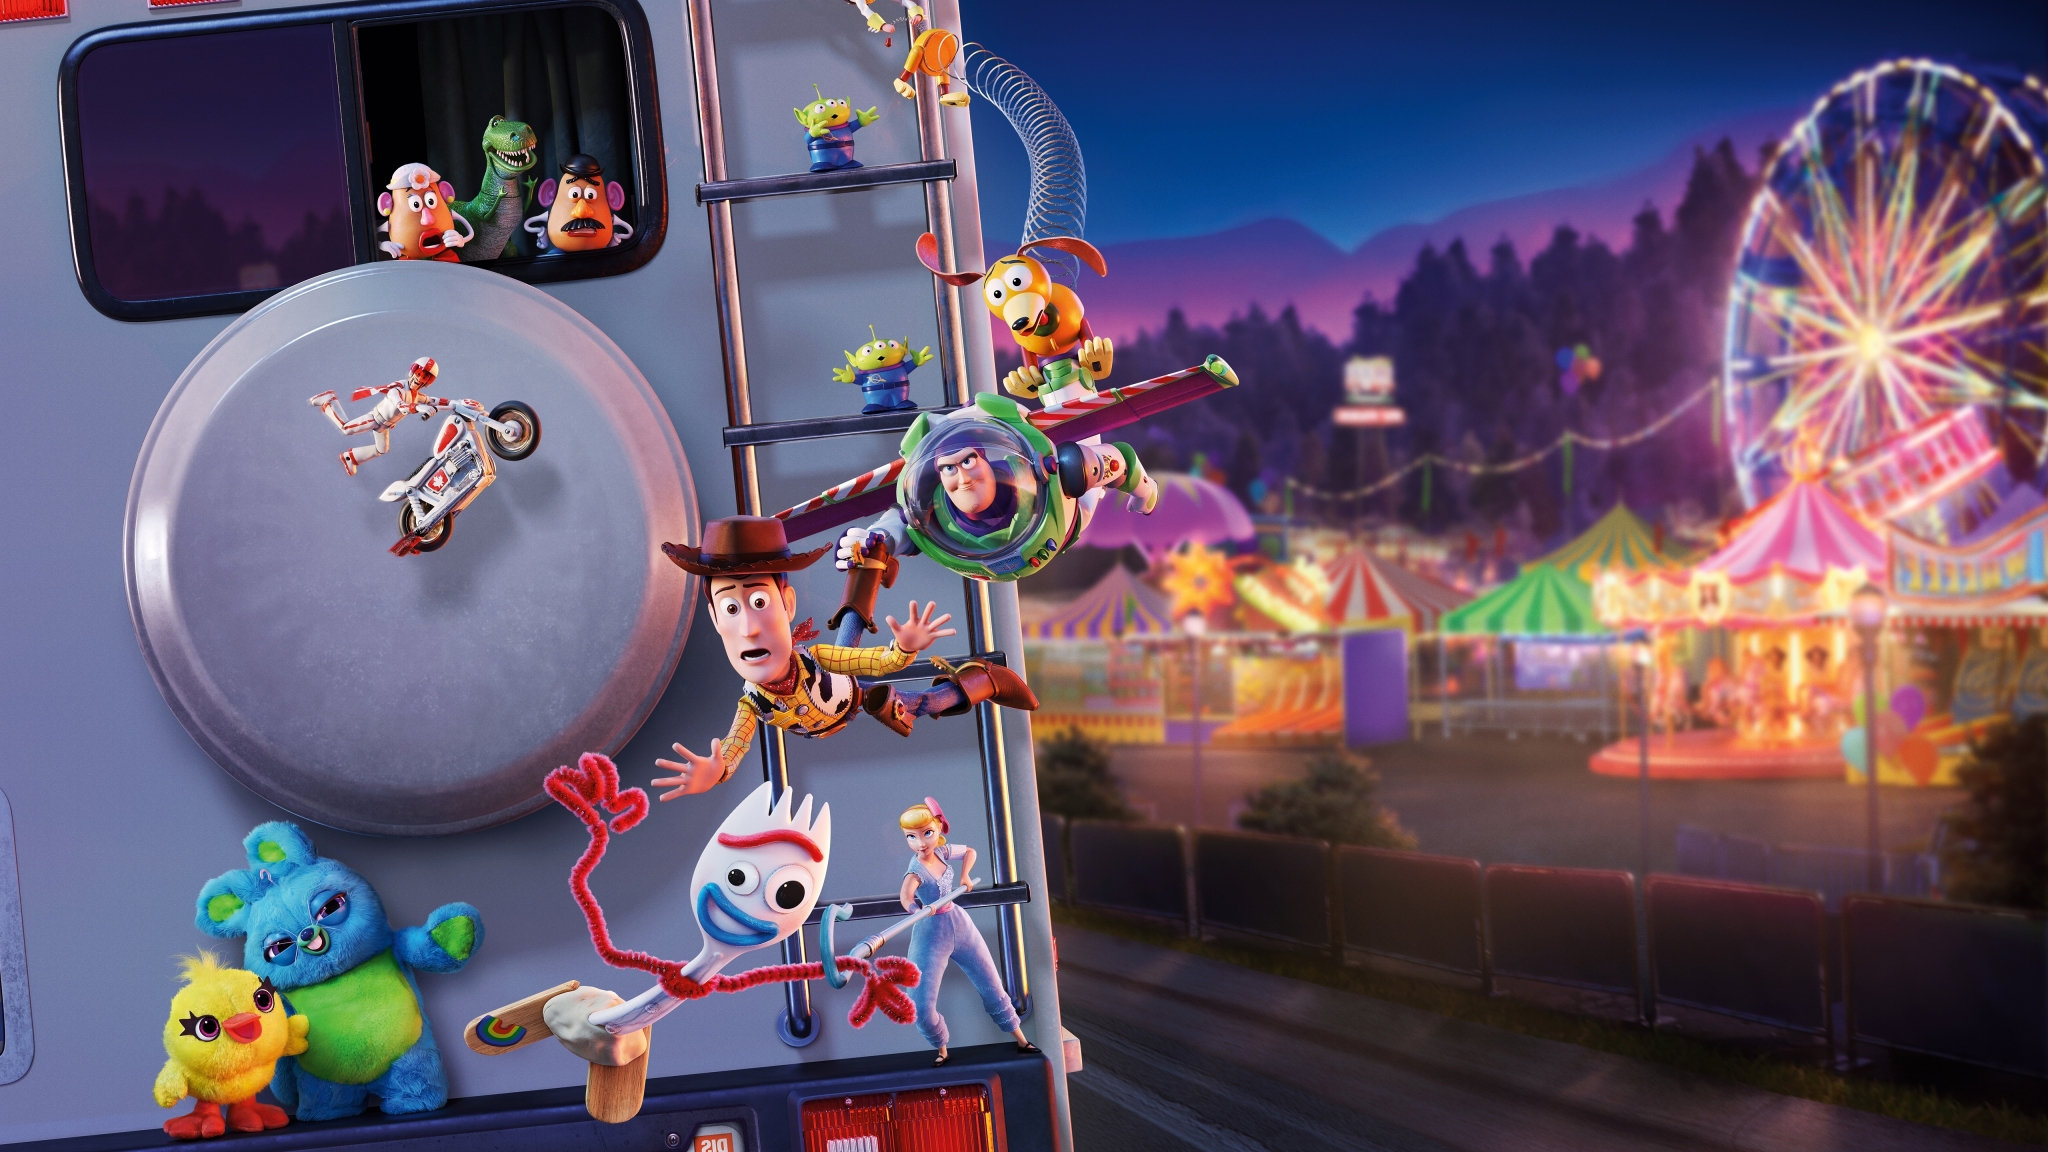 Wallpaper Animation Toy Story 4 Resolution5120x2880 Wallpx